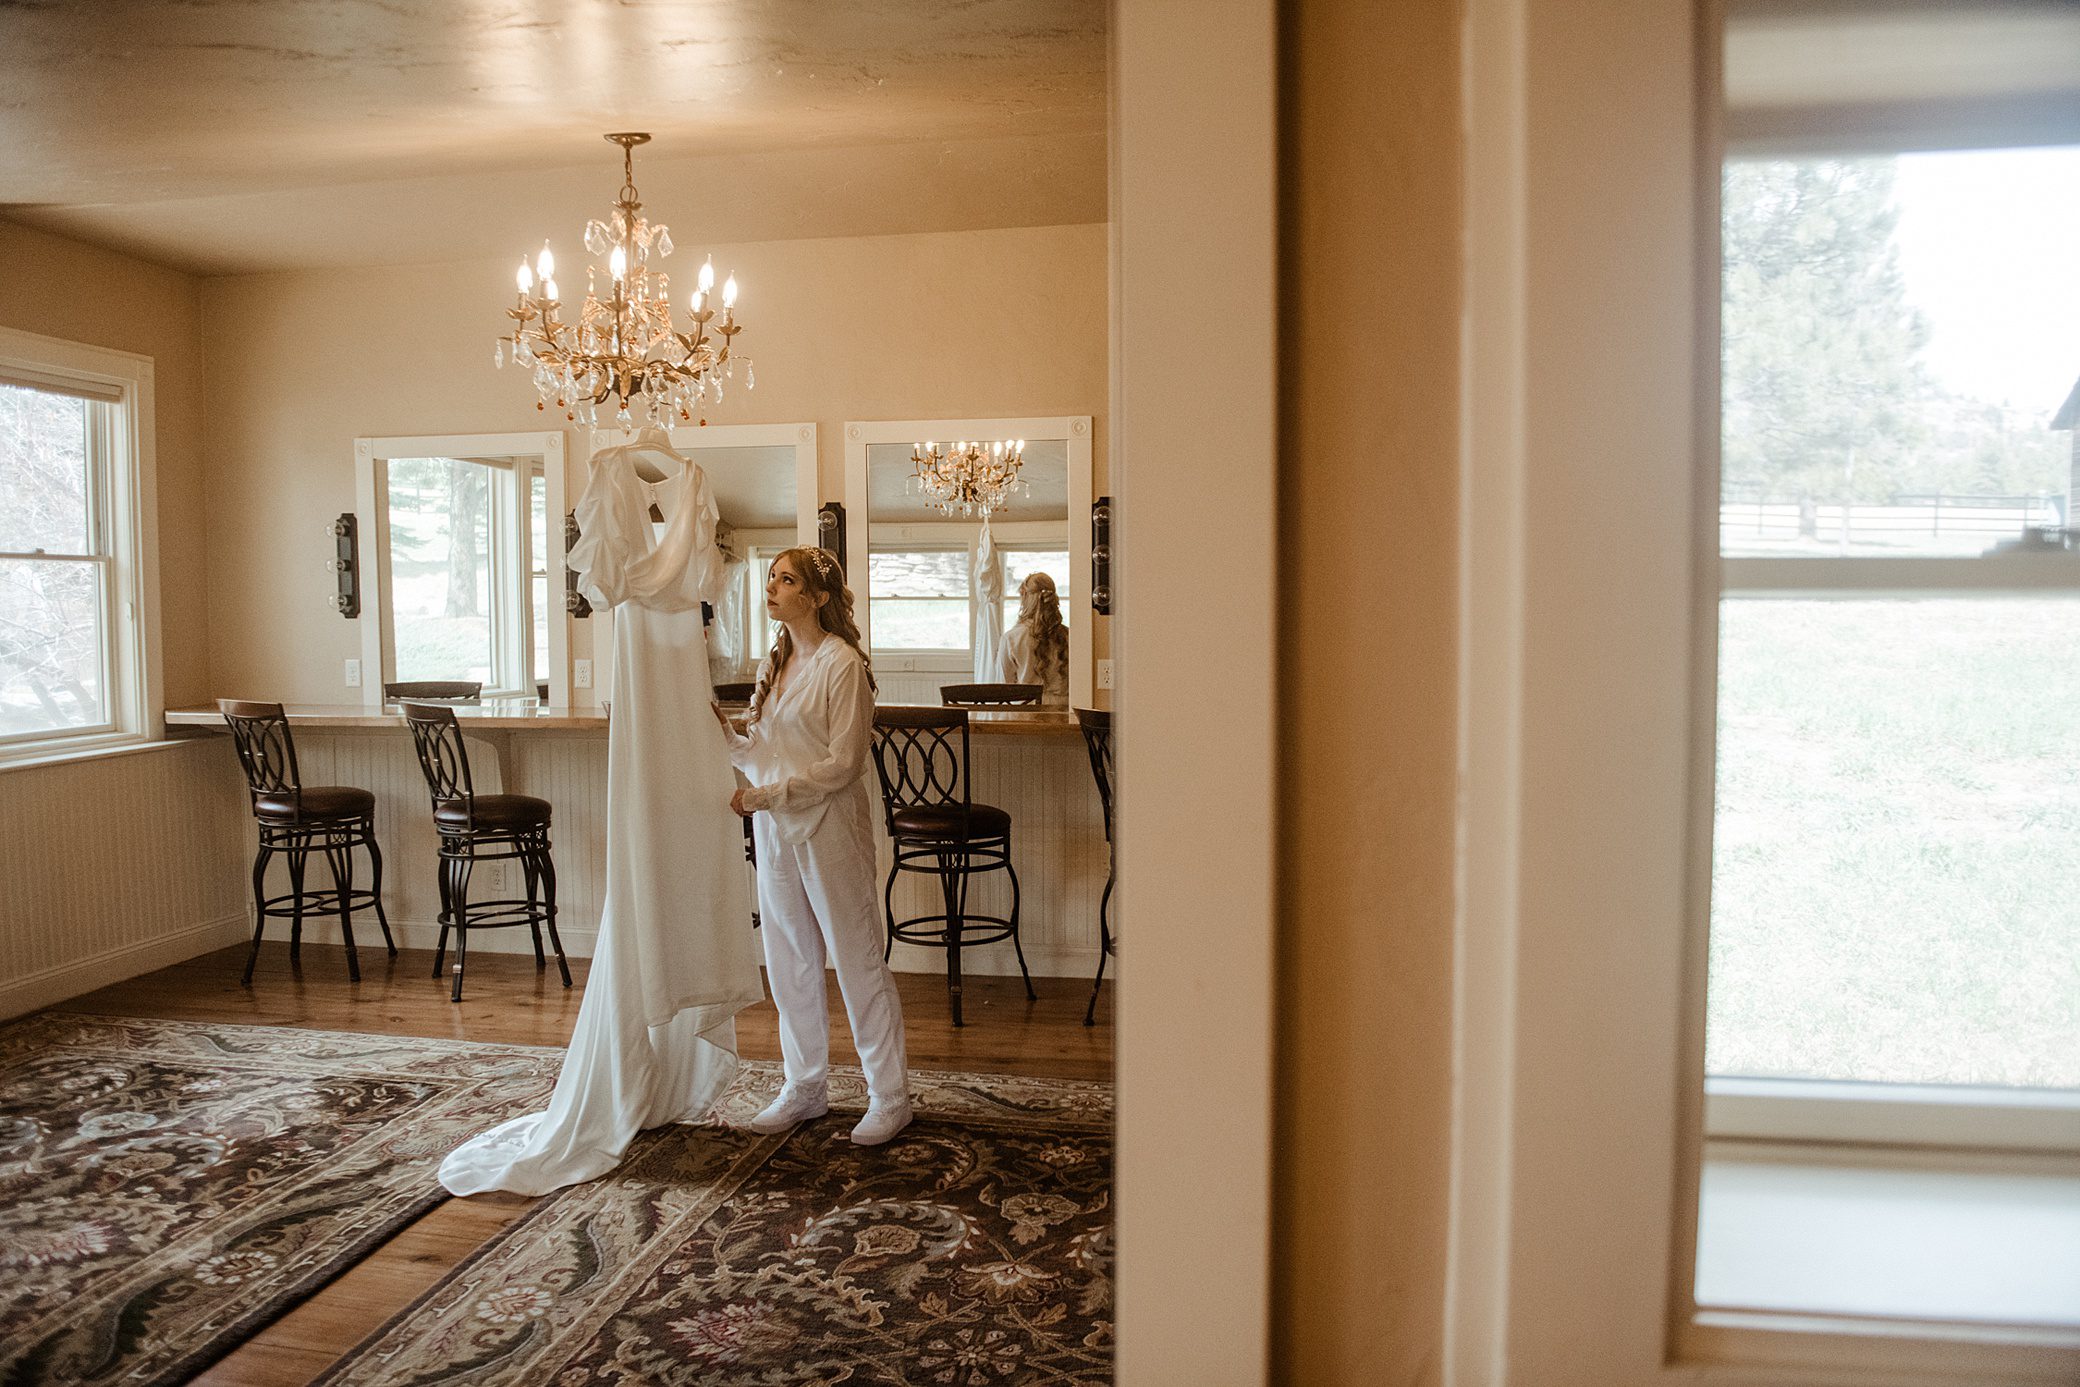 Bride admiring her wedding dress in the getting ready room of Lower Spruce Mountain Ranch